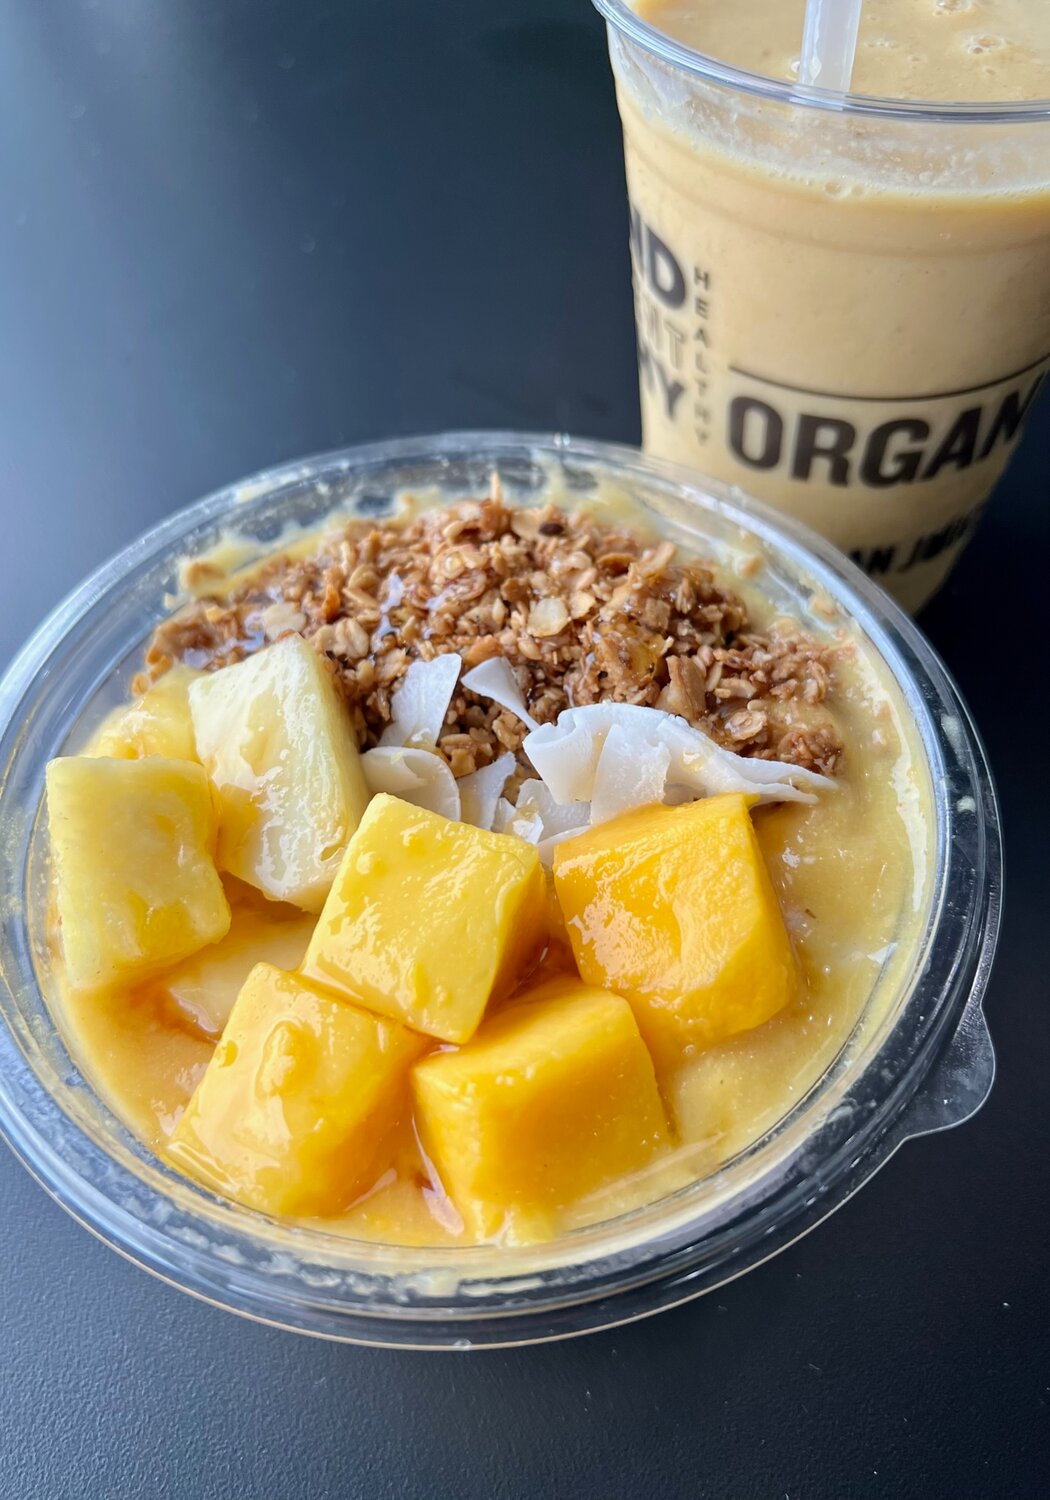 You’ll get a double dose of mango in the Be Happy Bowl and a creamy smoothie at Clean Juice.